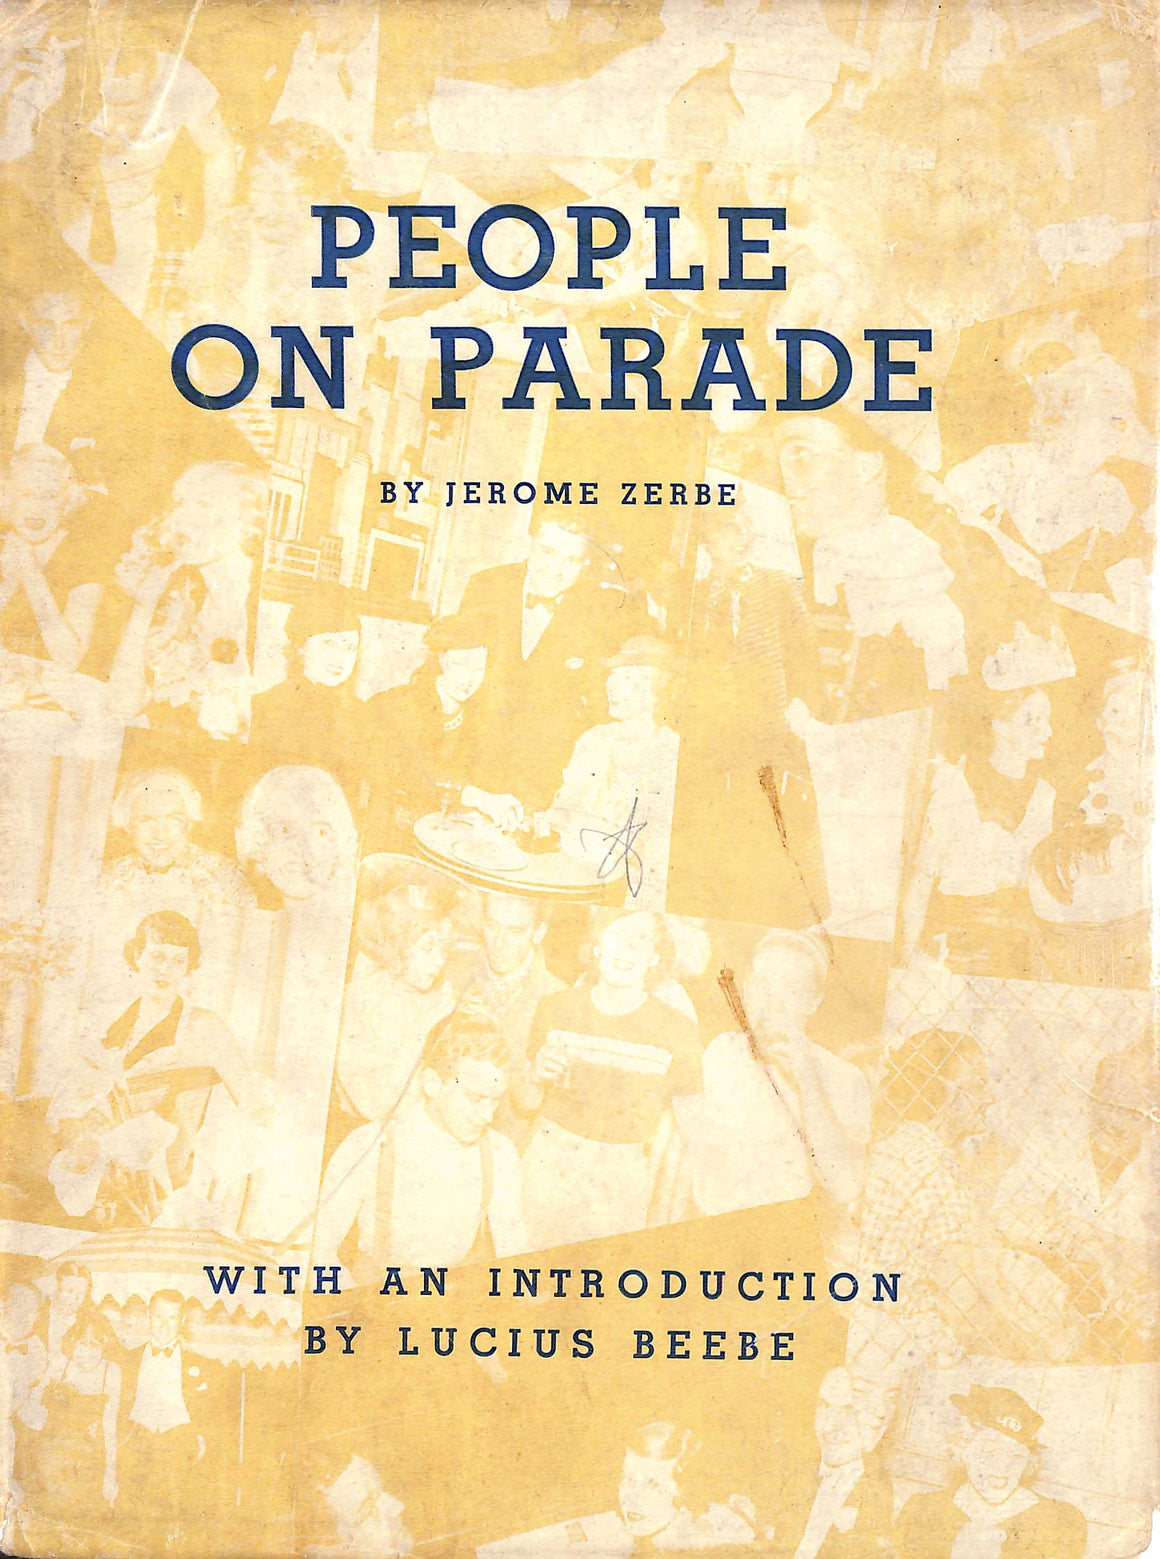 "People On Parade" Zerbe, Jerome